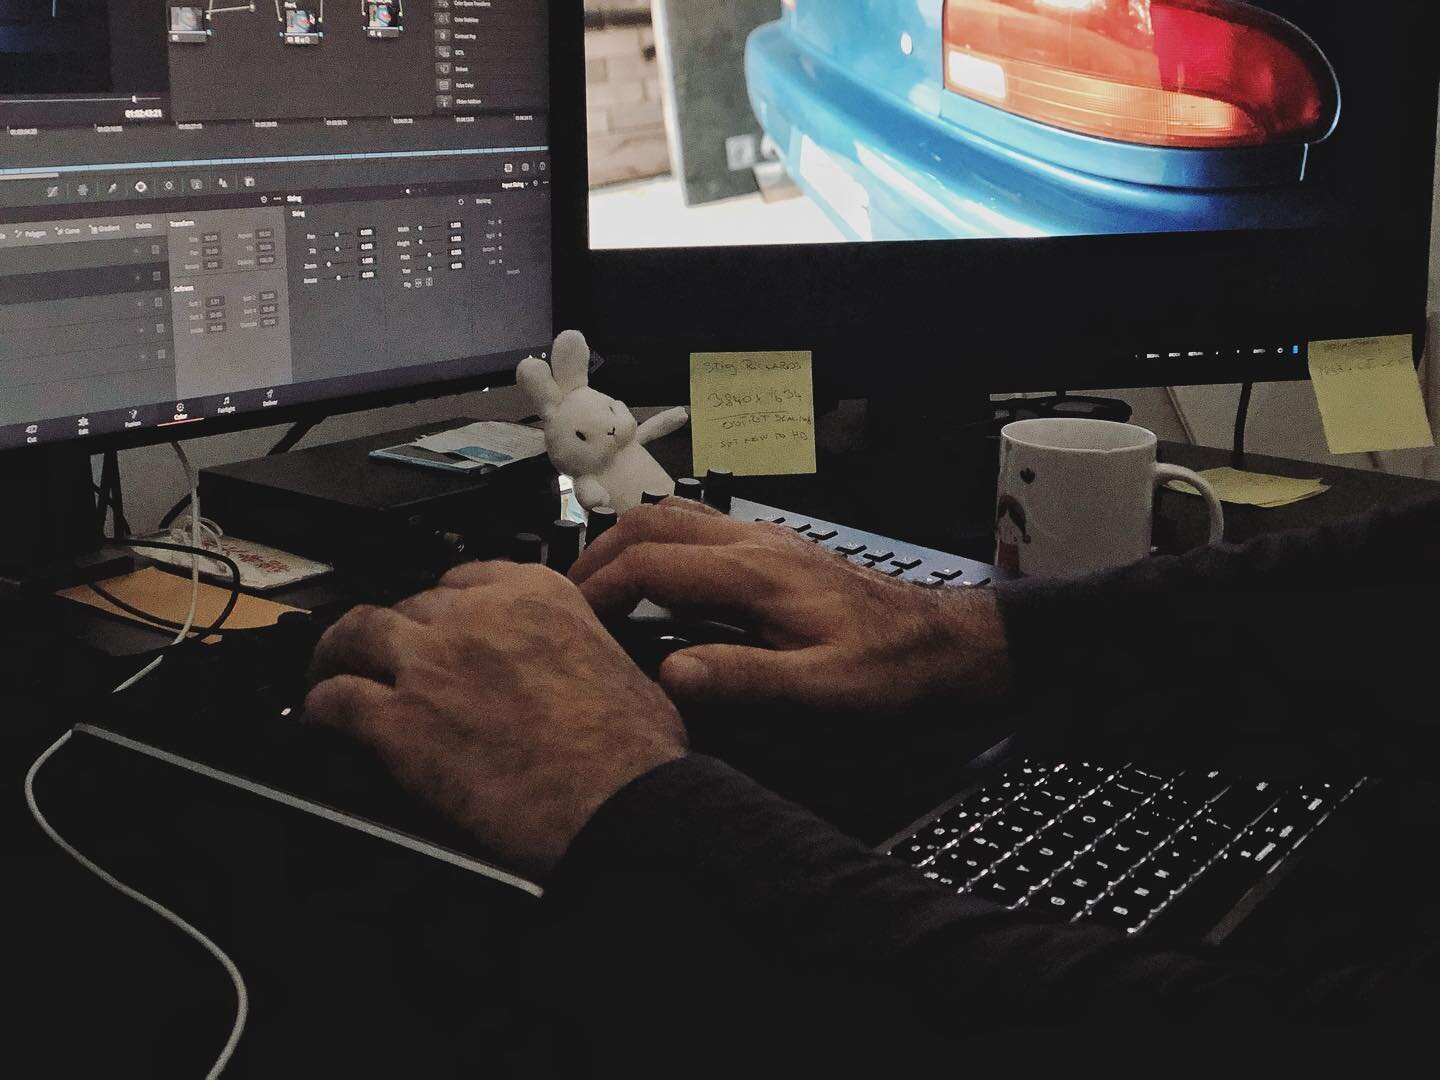 @luxmagica.colourgrading in the colouring studio yesterday working on the grade for the documentary! it looks absolutely beautiful, cannot wait for you all to see it. 
.

#film #filmmaking #filmmaker #cinema #cinematography #cinematographer #document